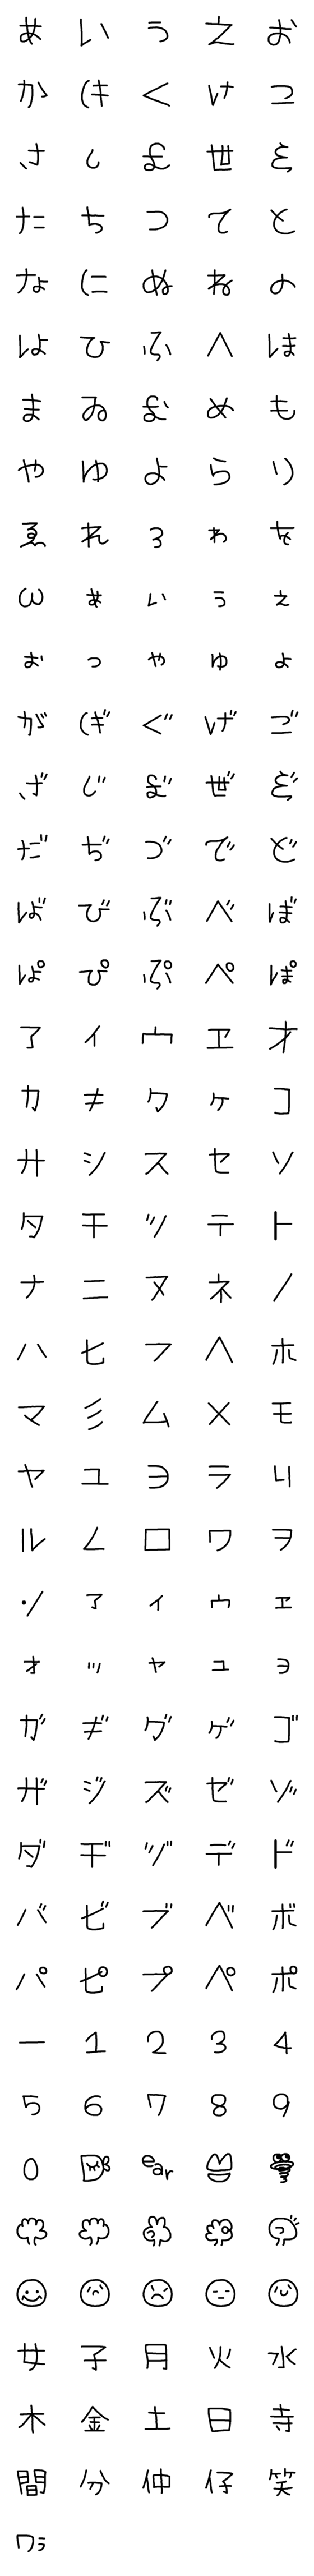 [LINE絵文字]★ギャル文字★の画像一覧